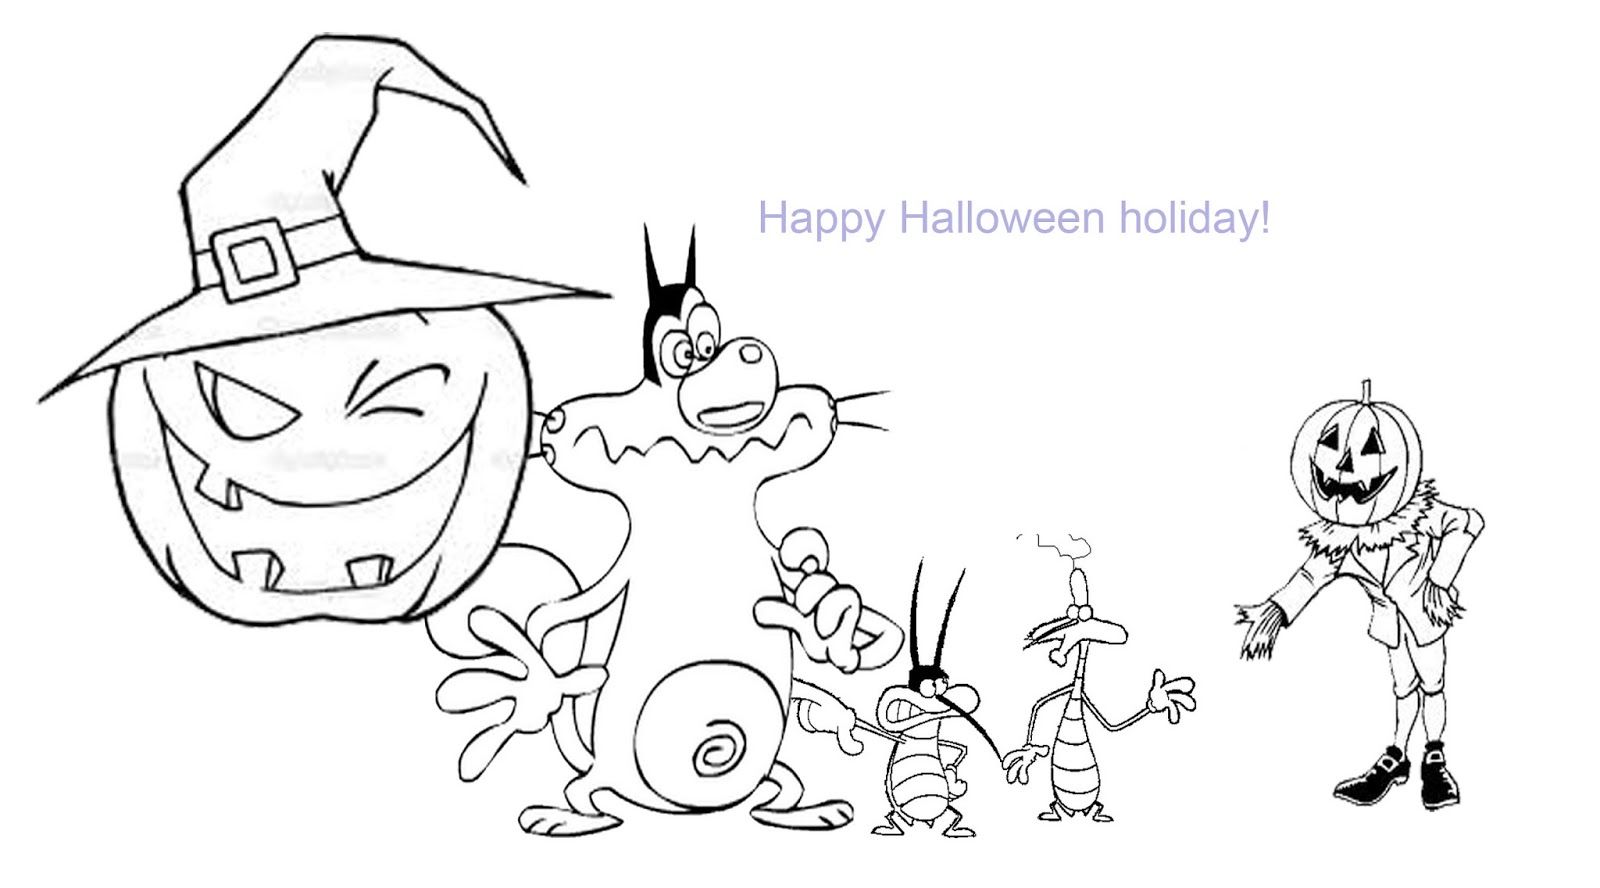 Oggy-halloween-coloring-pages-0.jpg